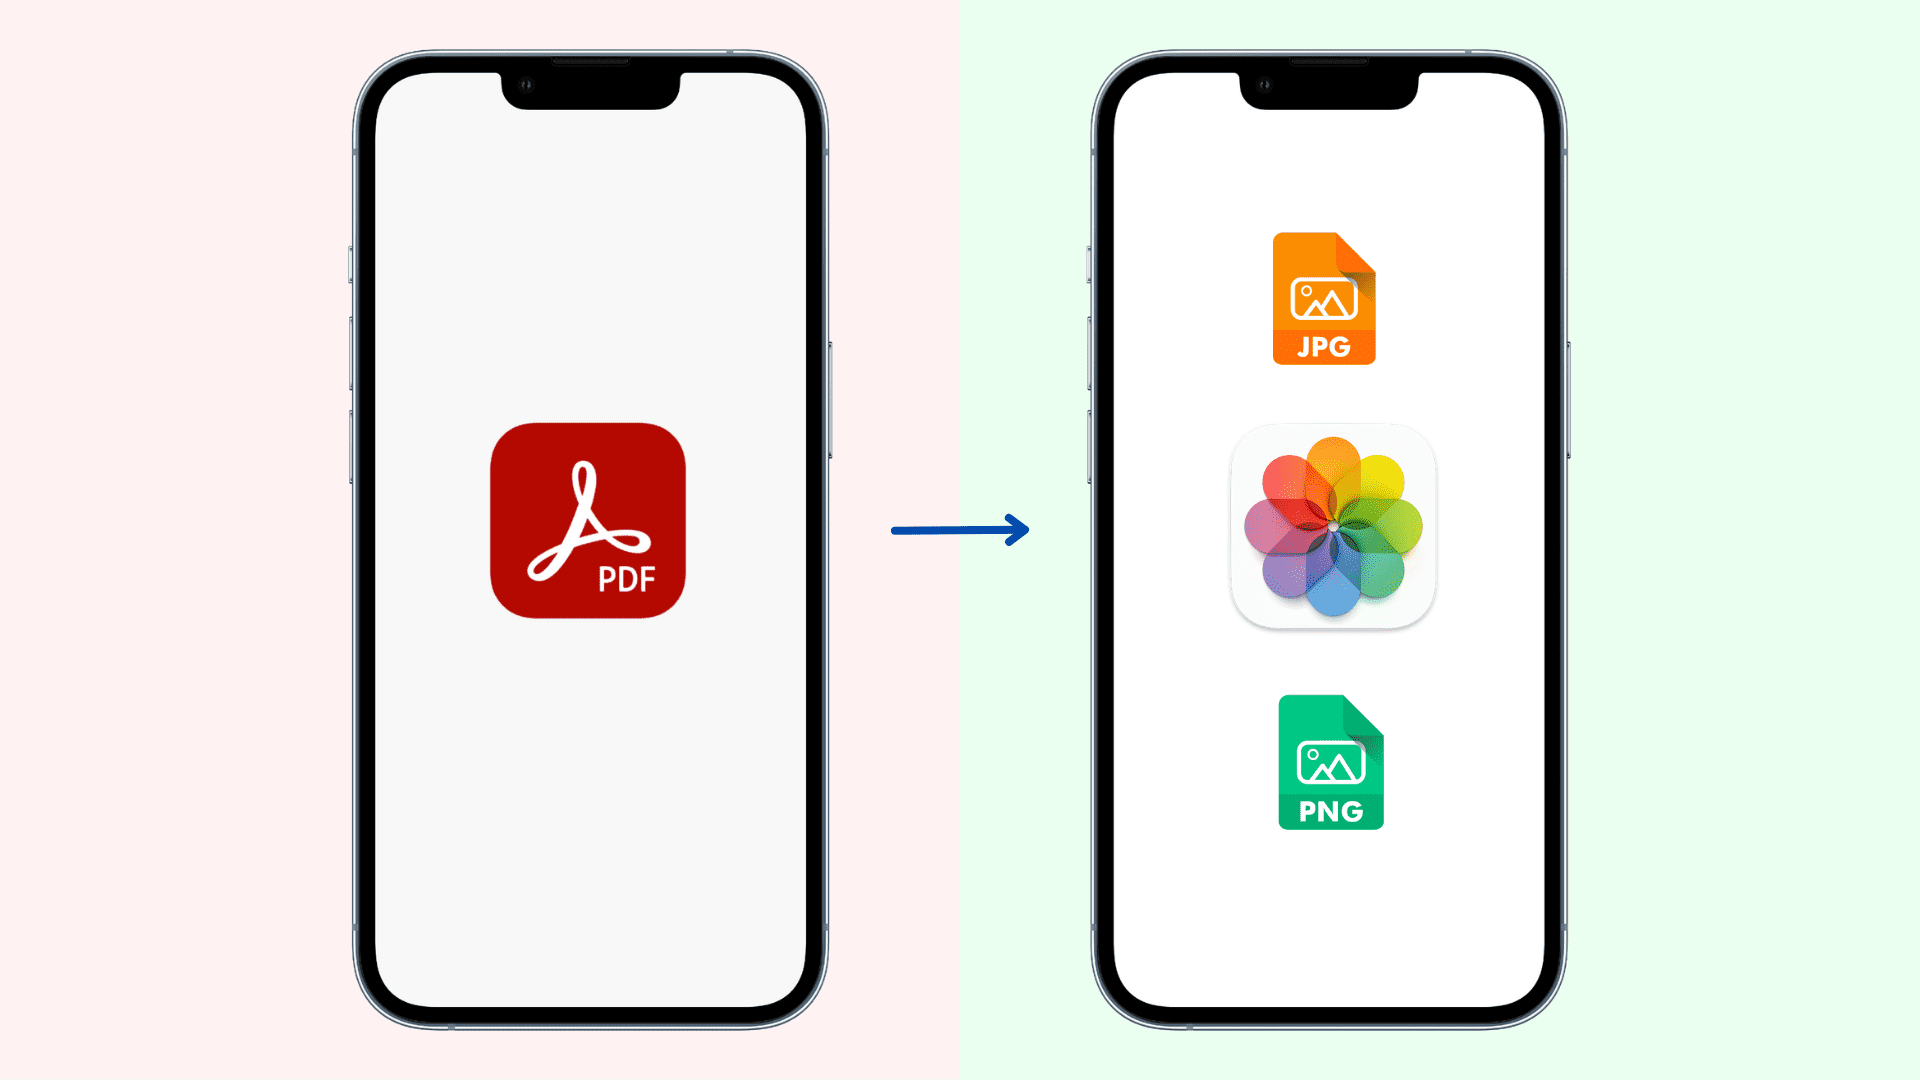 Convert PDF to image on iPhone